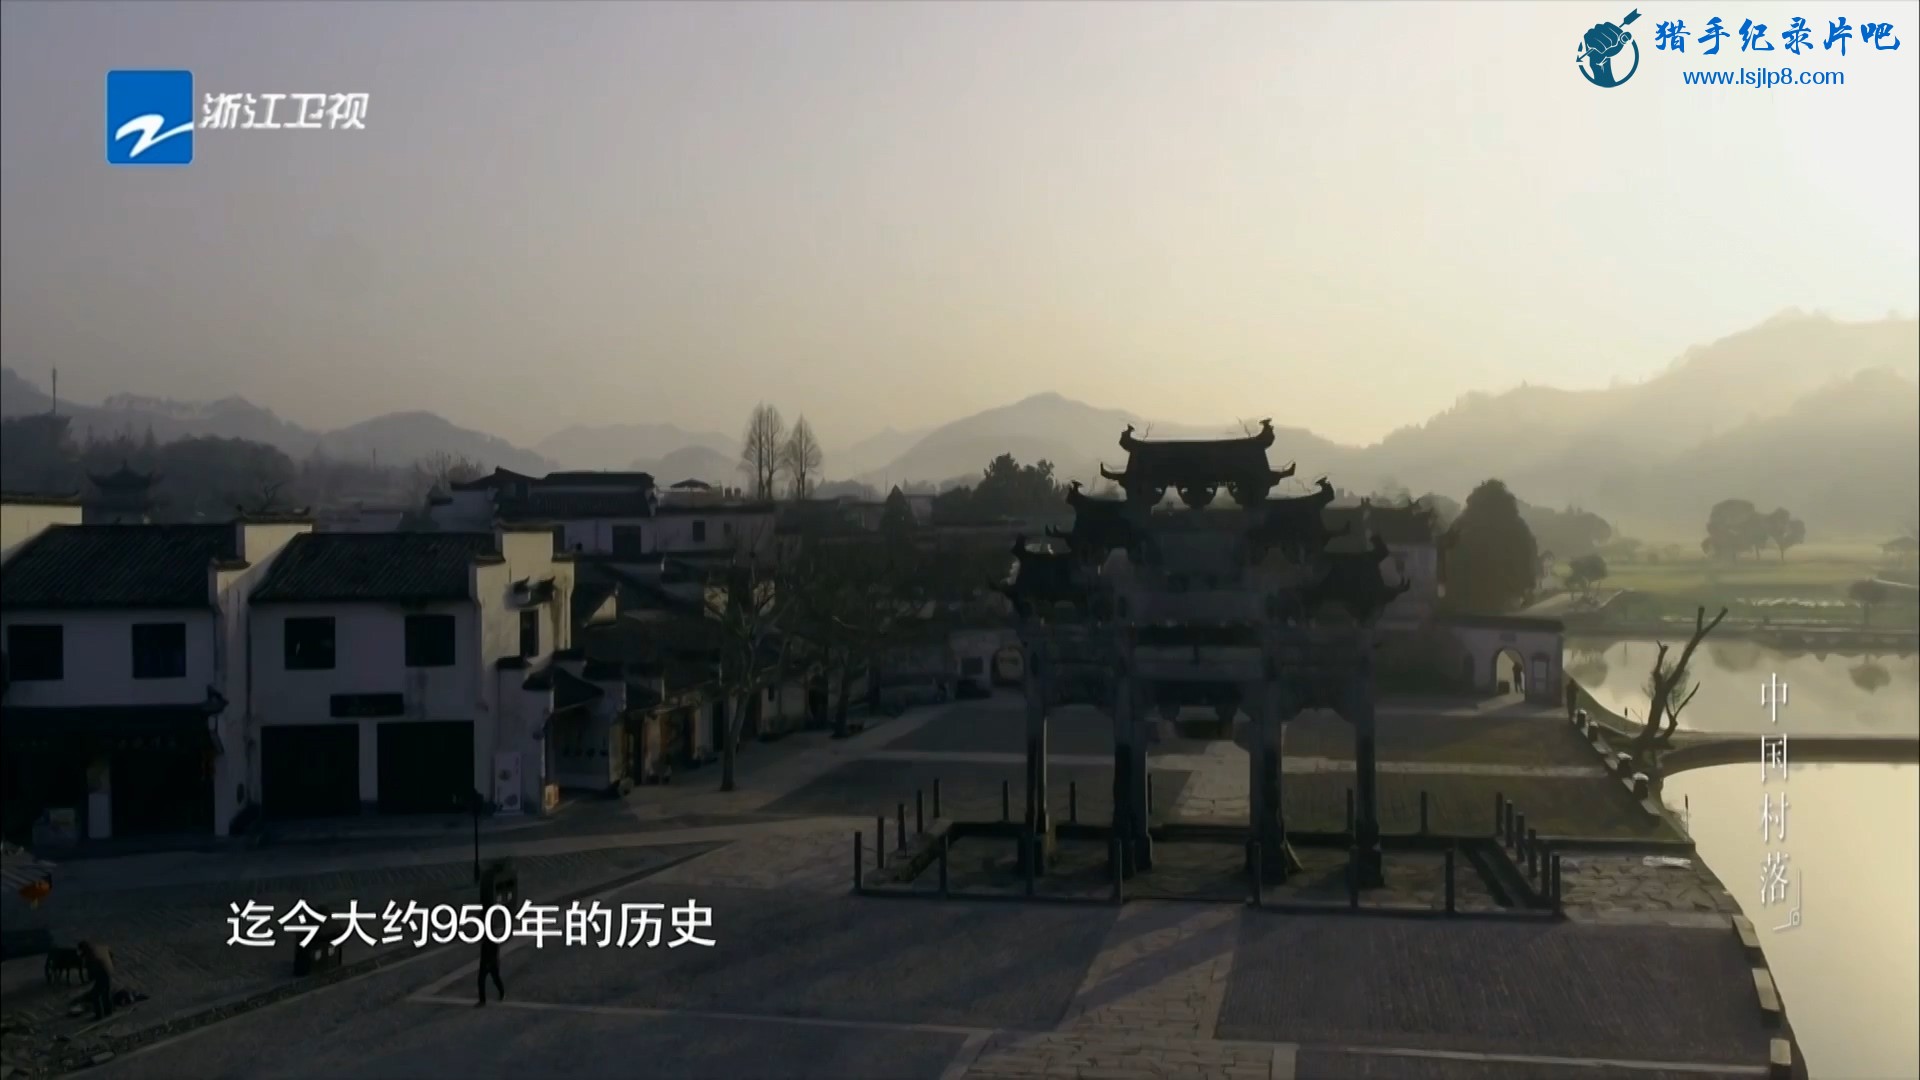 ZJTV-HD,Villages.in.China.EP01.HDTV.1080i.H264.AAC.ts_20190920_082220.770.jpg